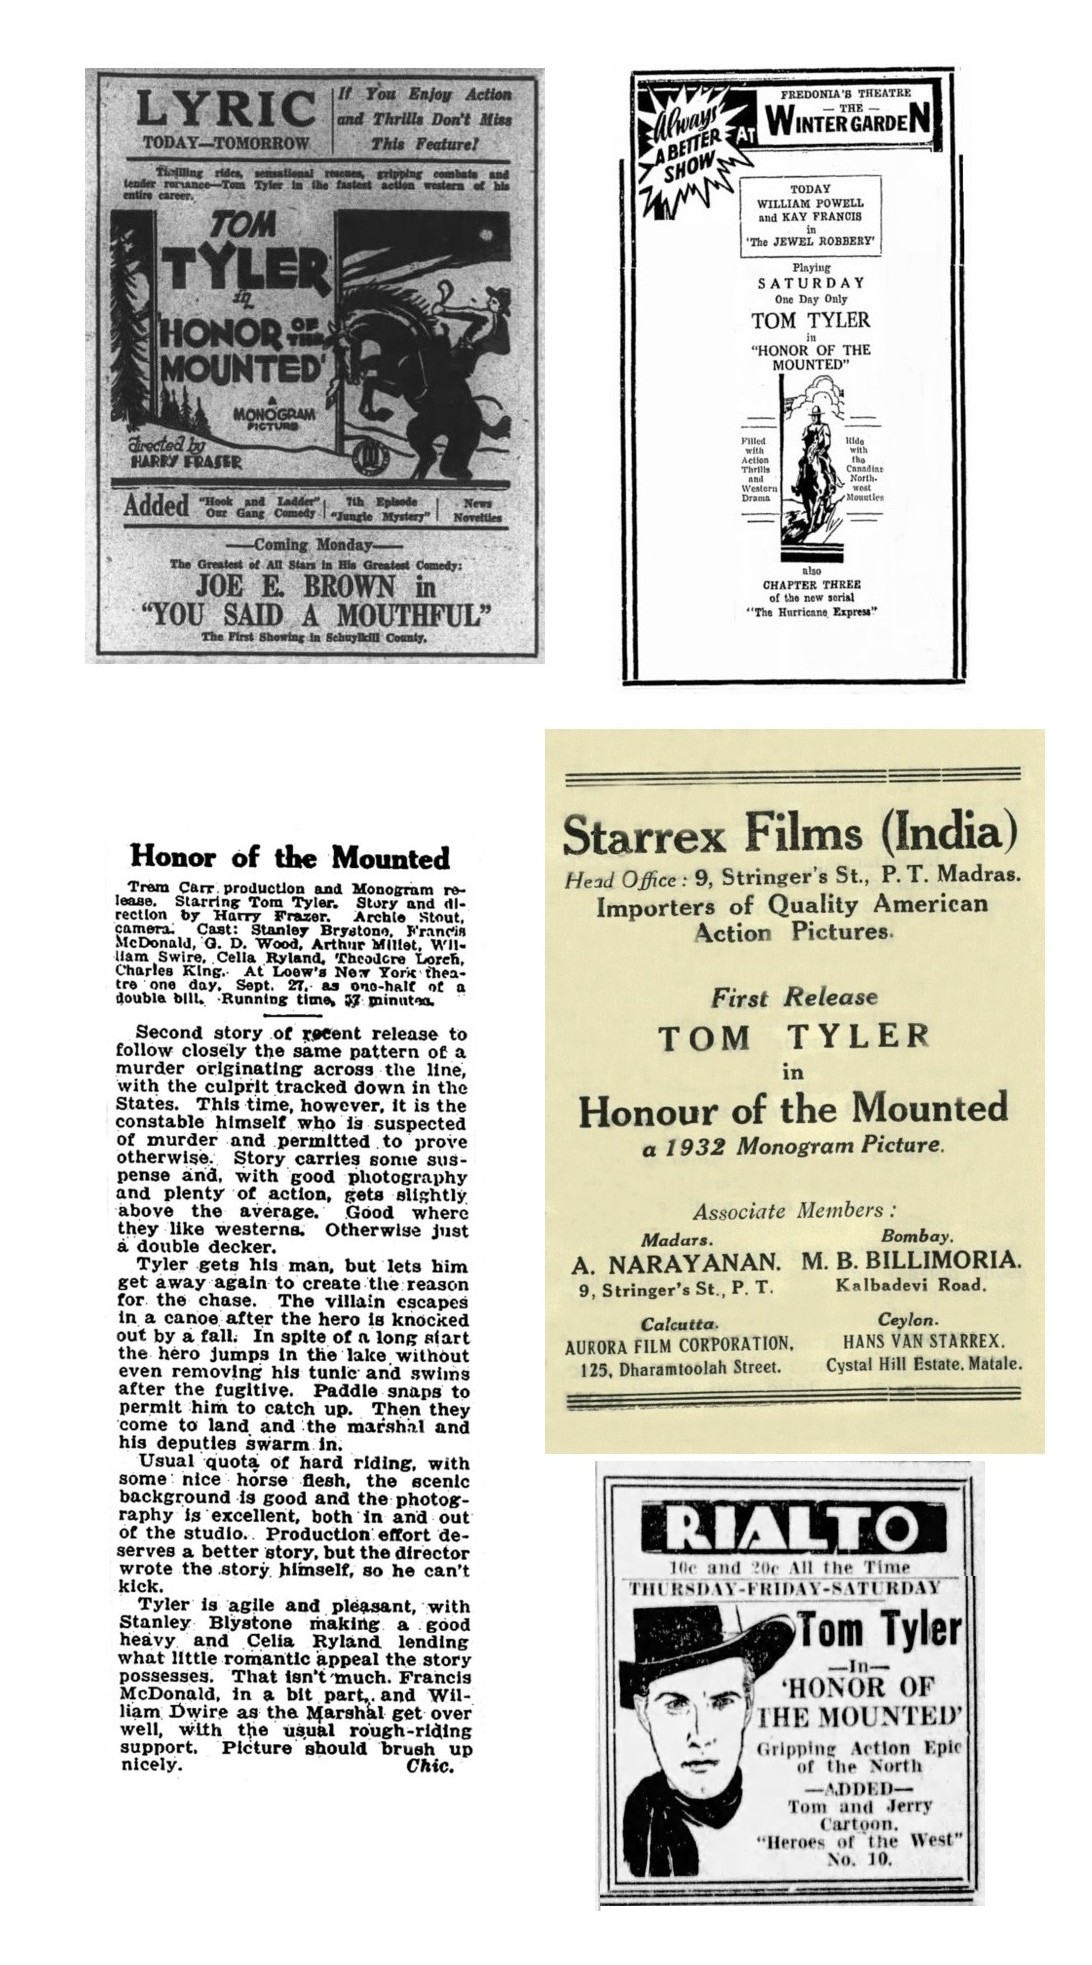 Honor of the Mounted cinema ads